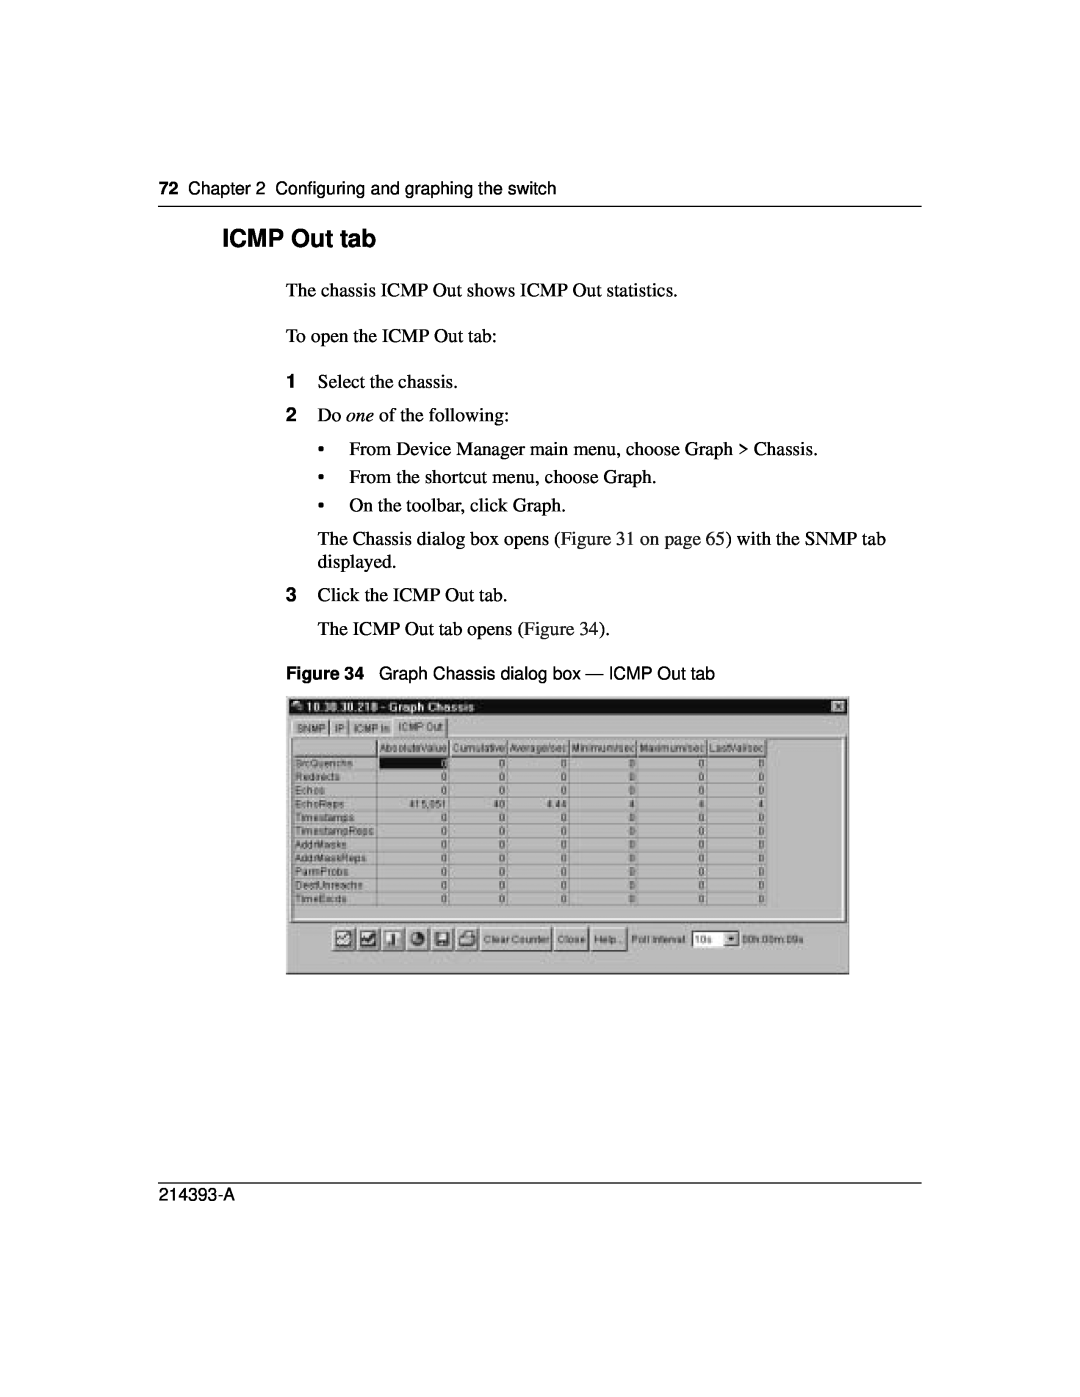 Nortel Networks 214393-A manual ICMP Out tab 